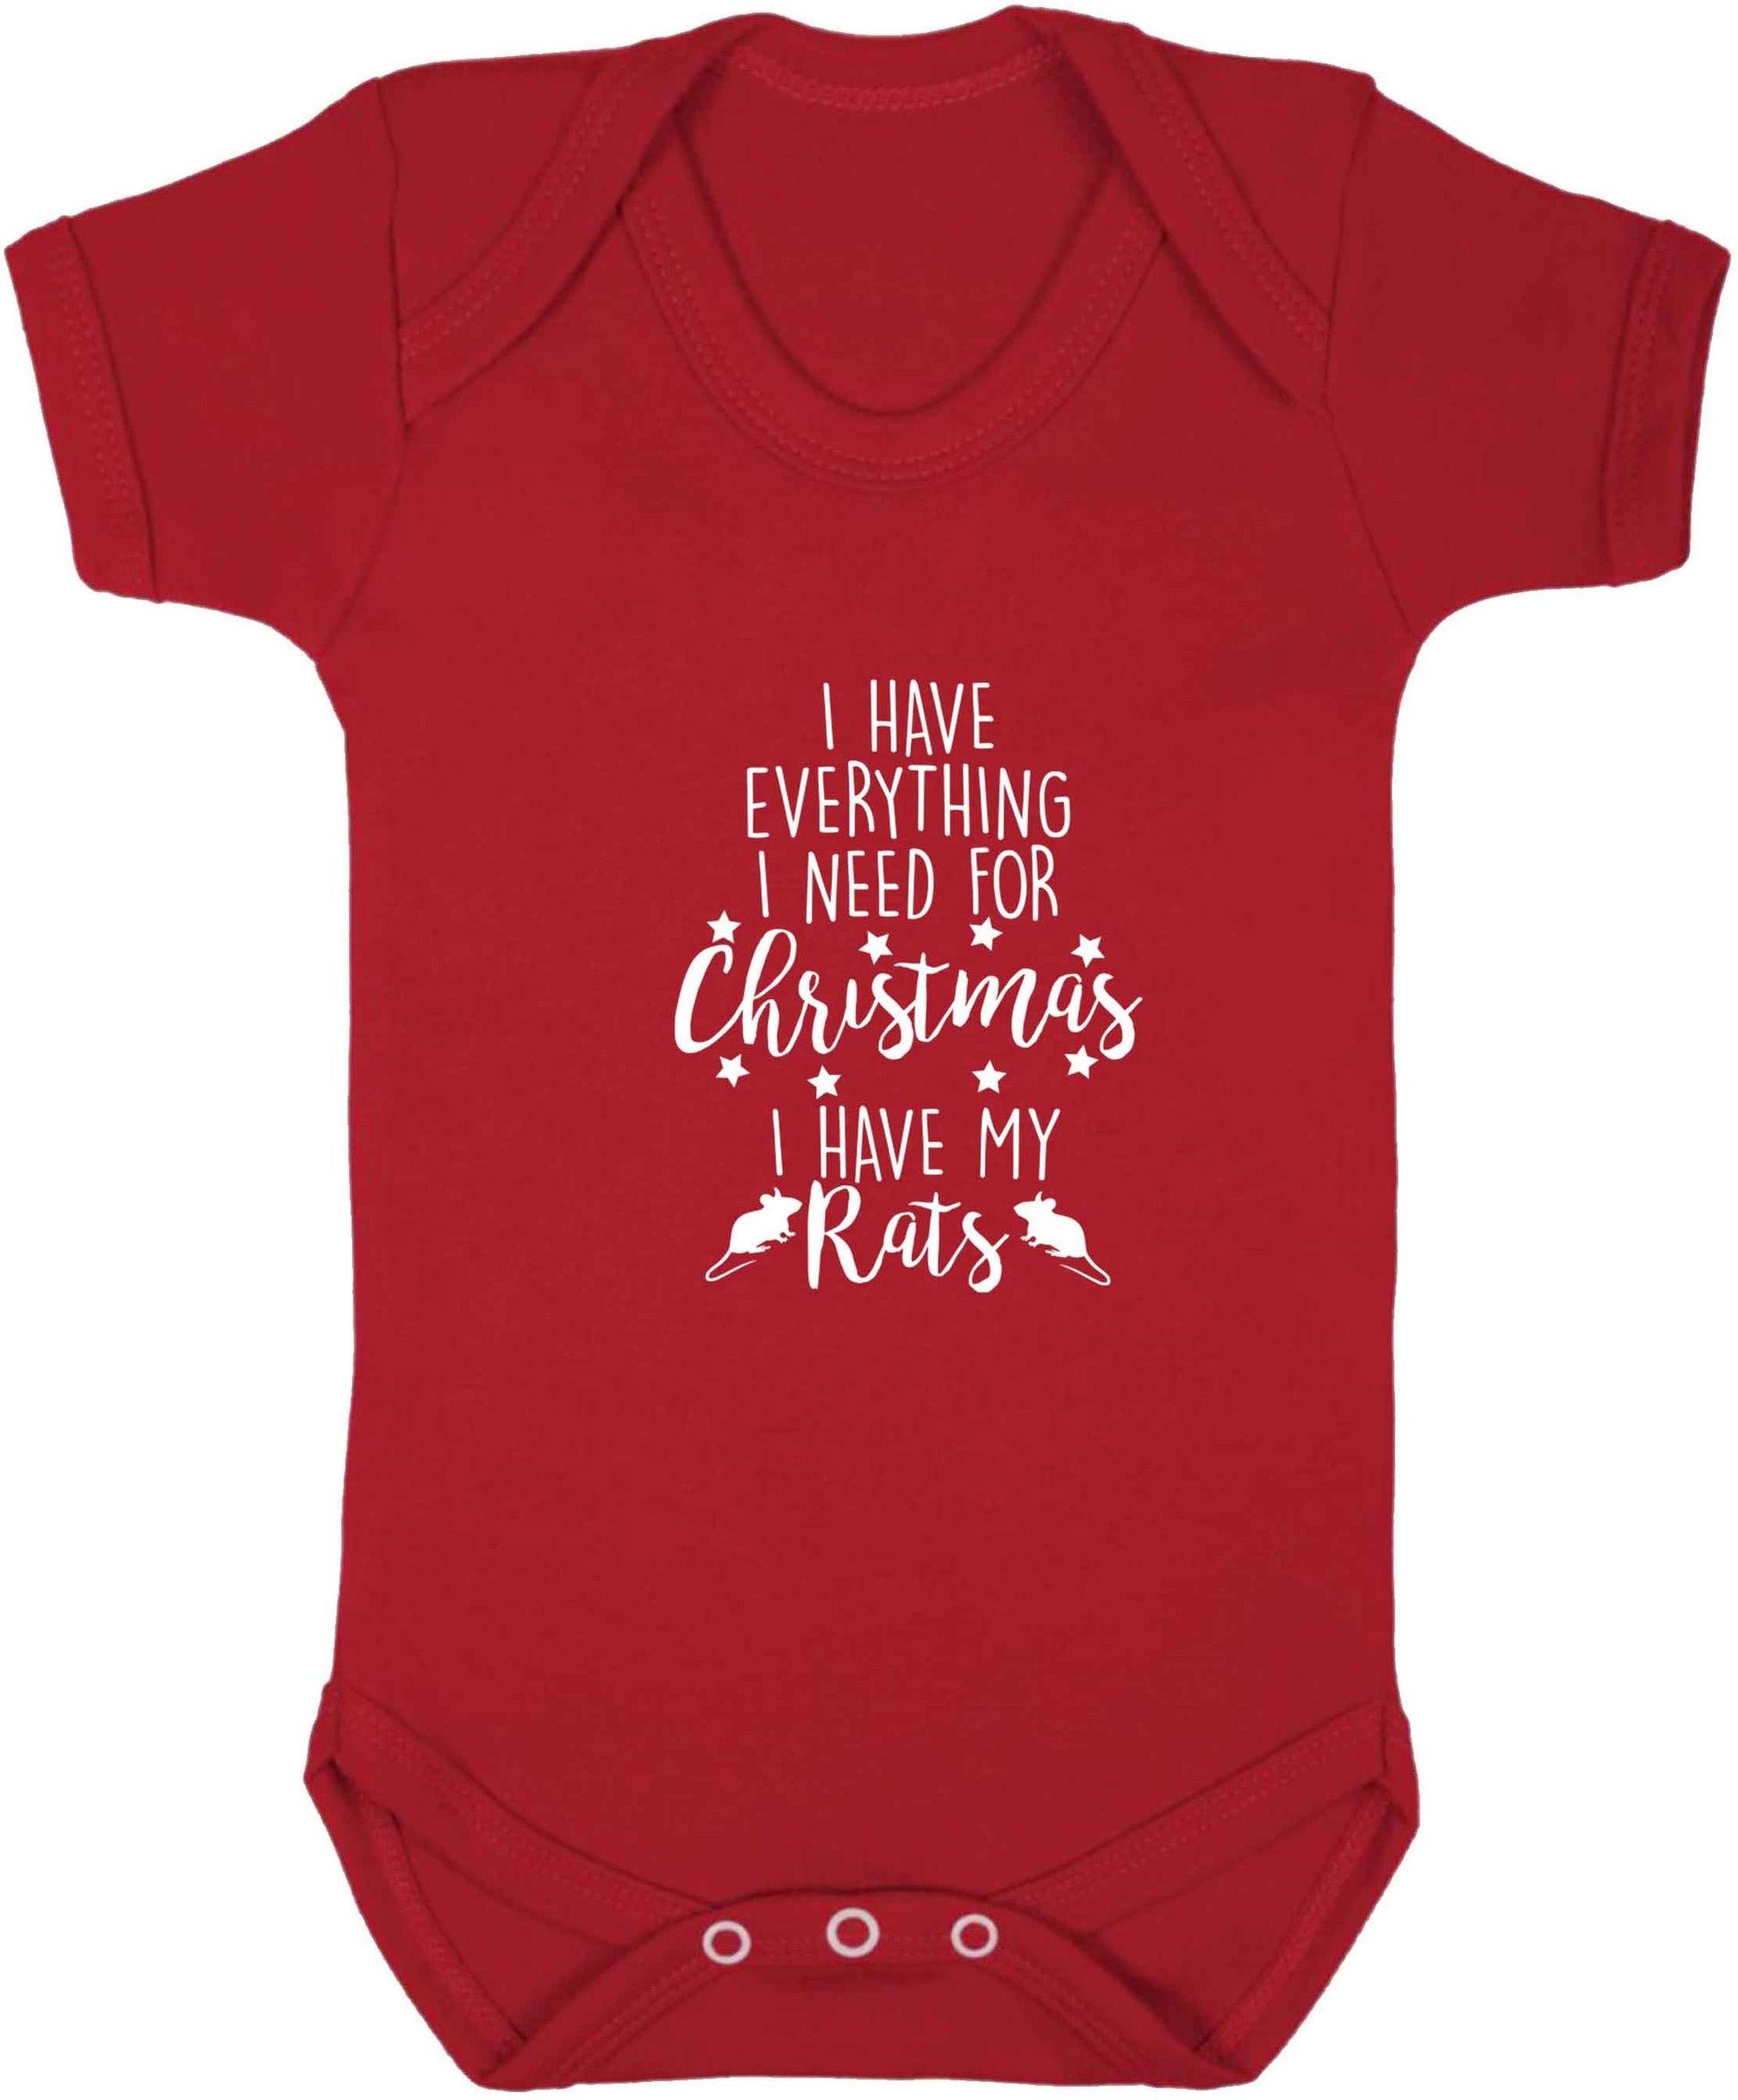 I have everything I need for Christmas I have my rats baby vest red 18-24 months